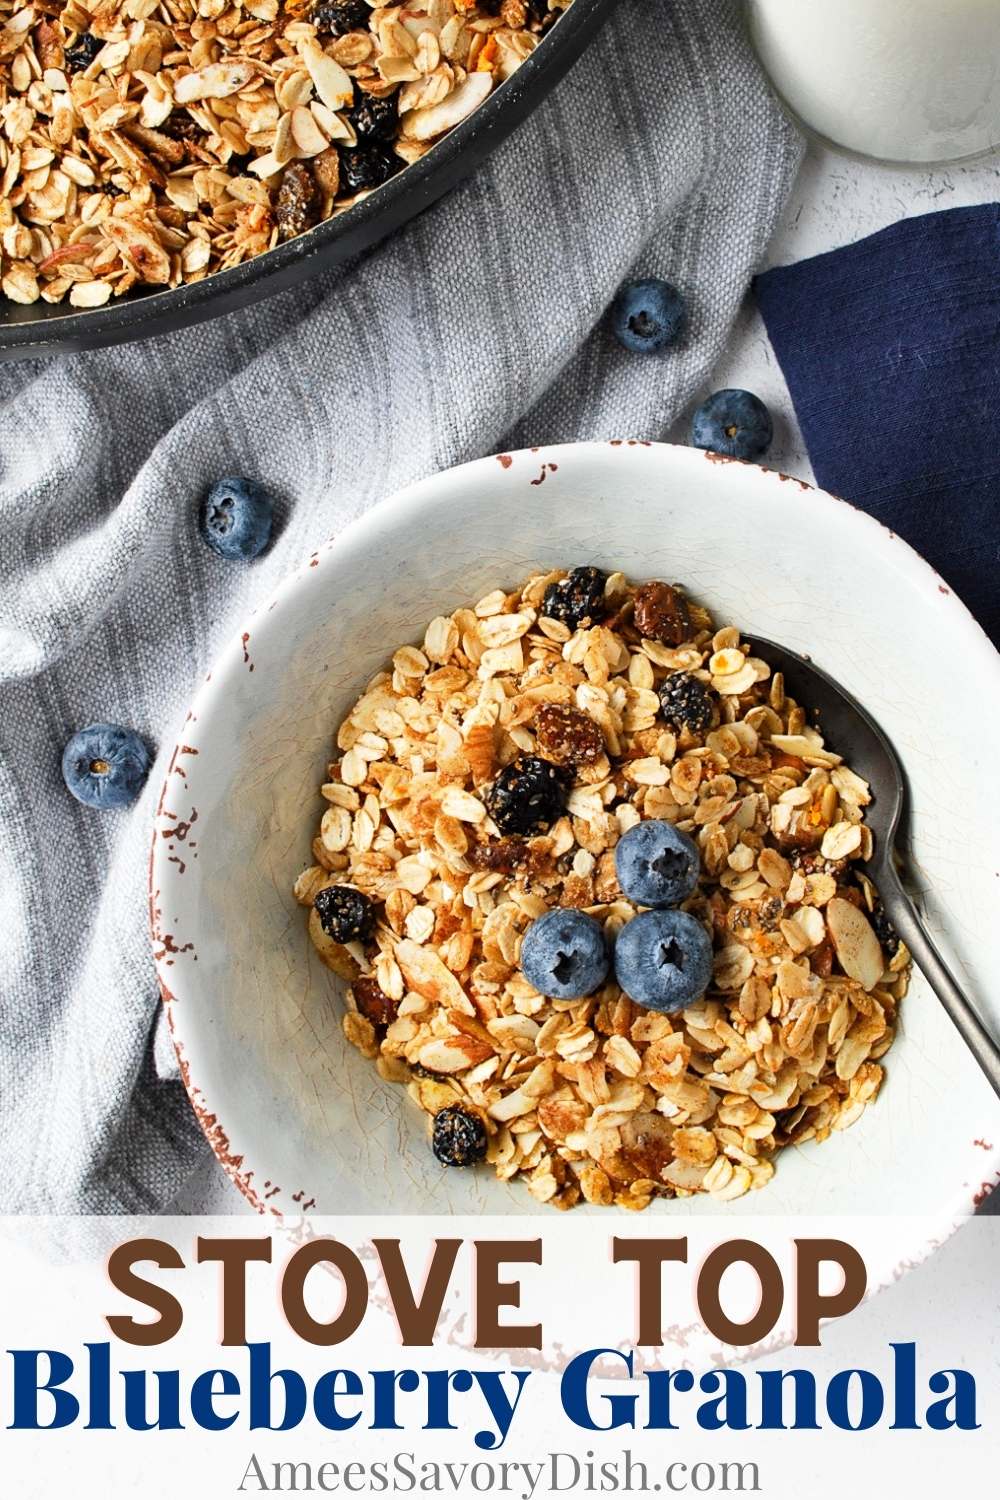 This stovetop Blueberry Granola recipe is packed with a healthy and wholesome variety of sweet and spiced flavors and textures. Ready in under 10 minutes! via @Ameessavorydish